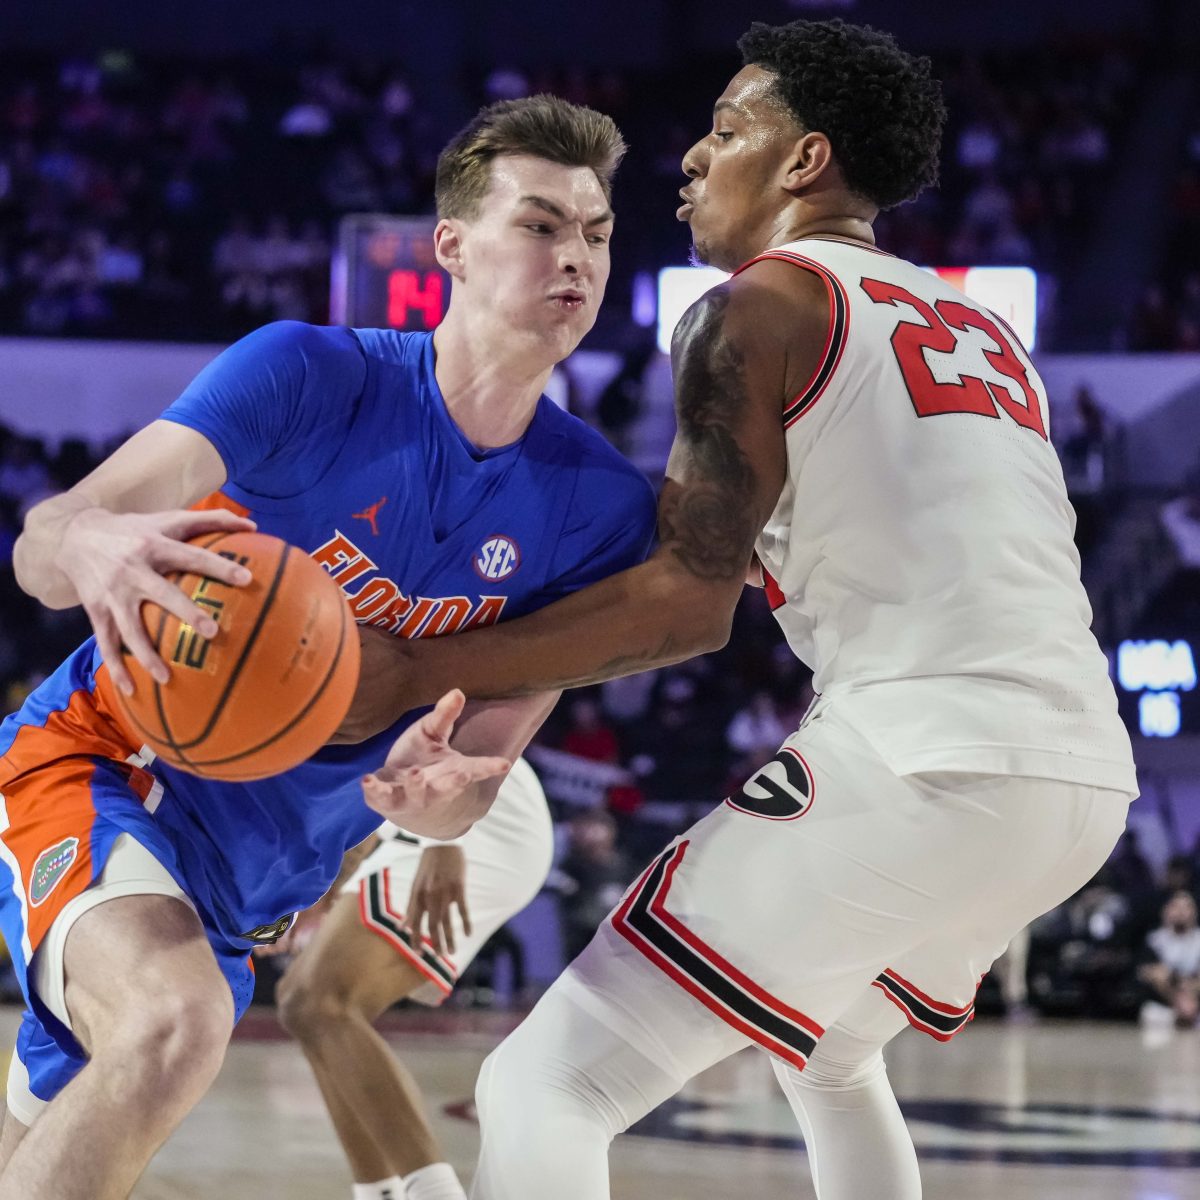 Oregon State vs. Florida Prediction, Preview, and Odds - 11-25-2022